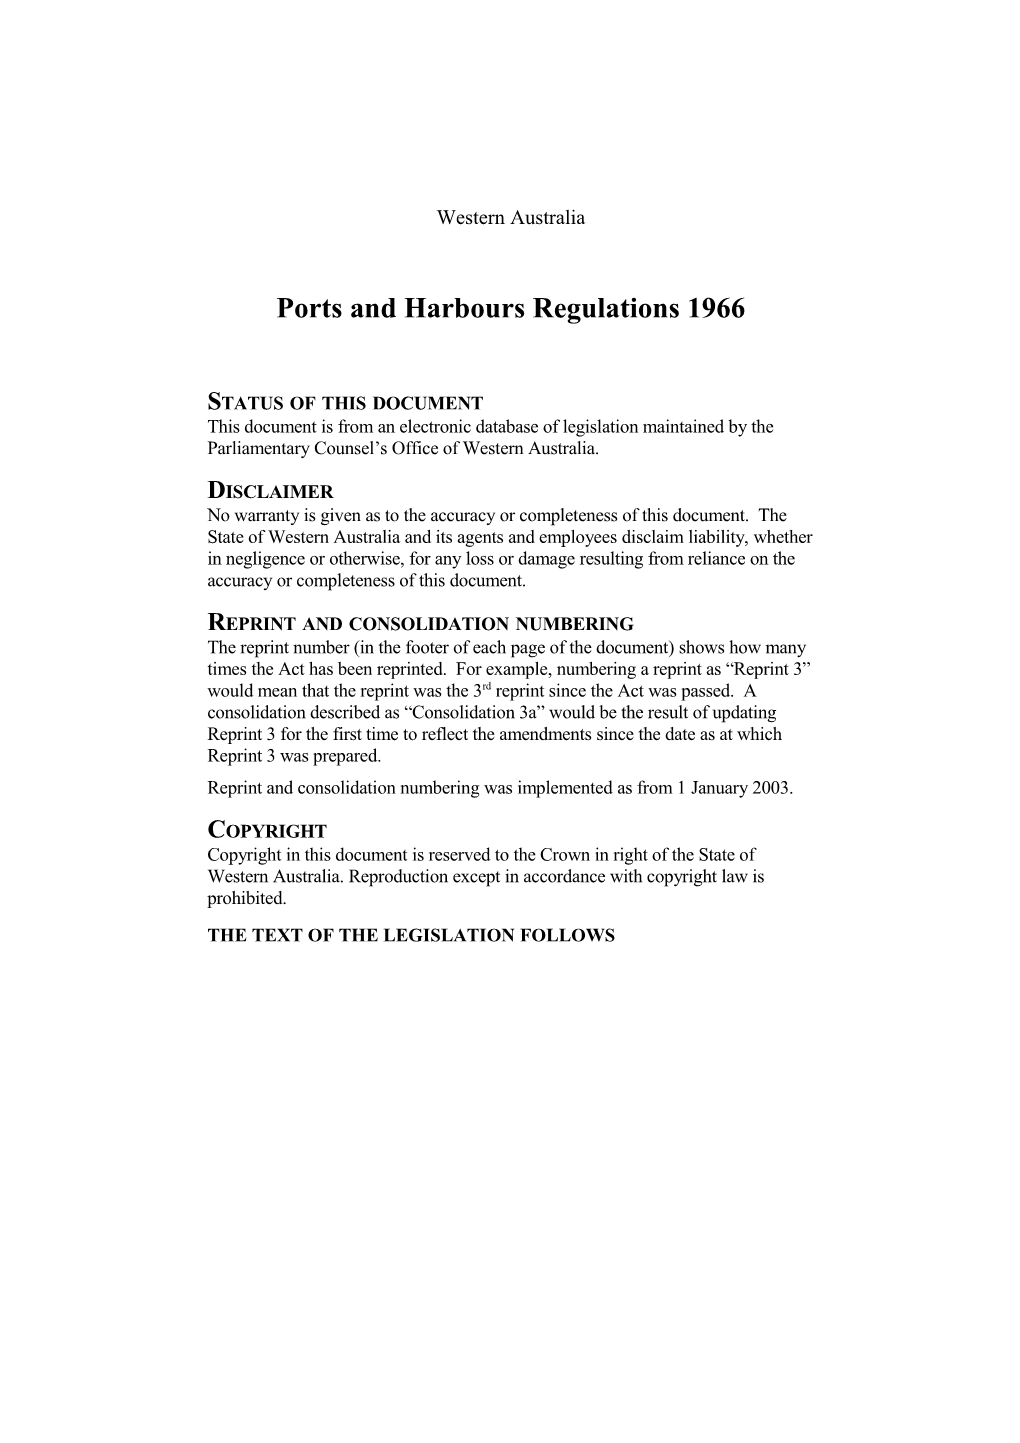 Ports and Harbours Regulations 1966